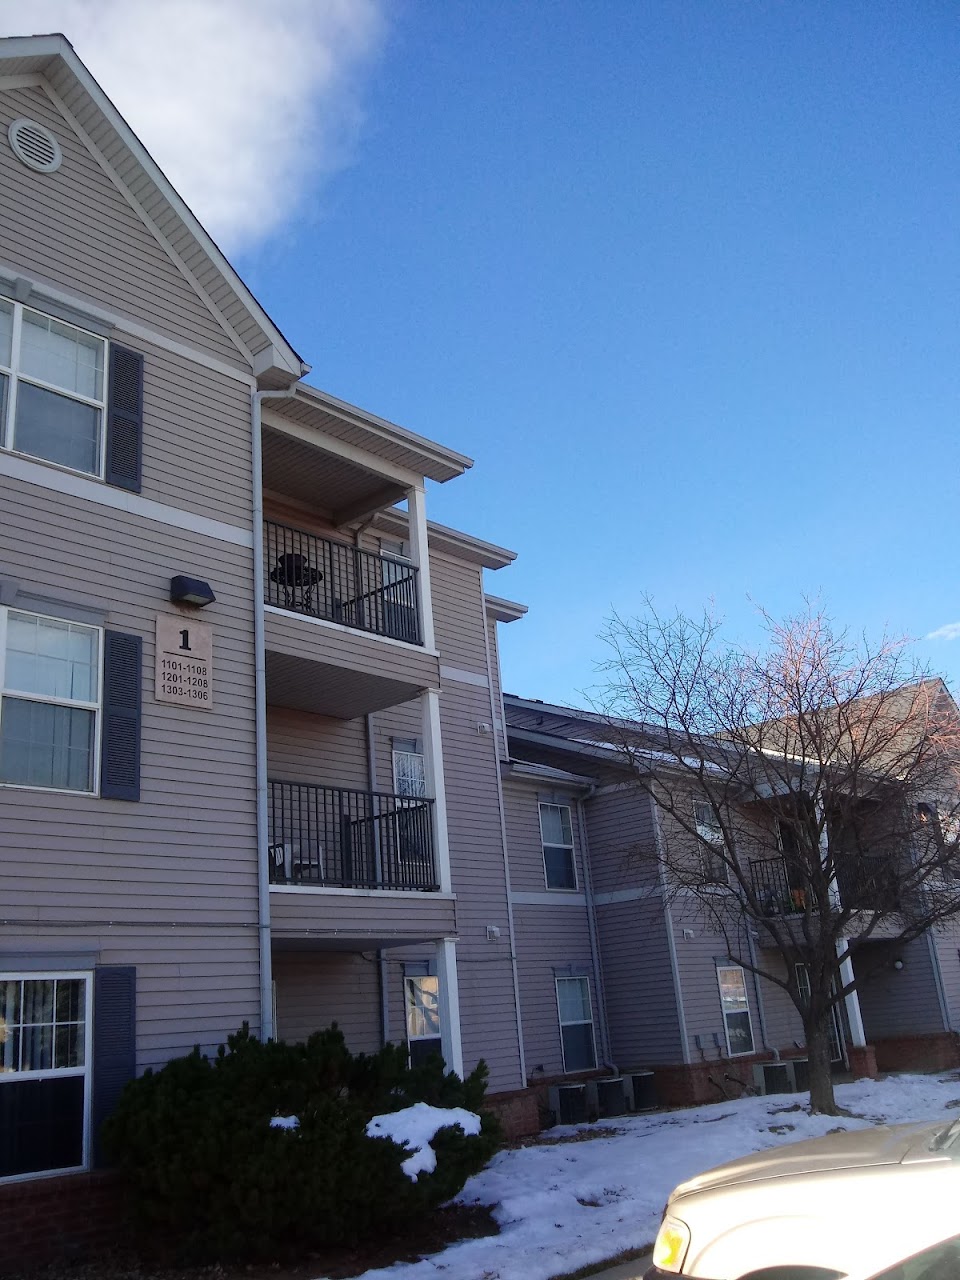 Photo of QUAIL VILLAGE. Affordable housing located at 321 QUAIL RD LONGMONT, CO 80501